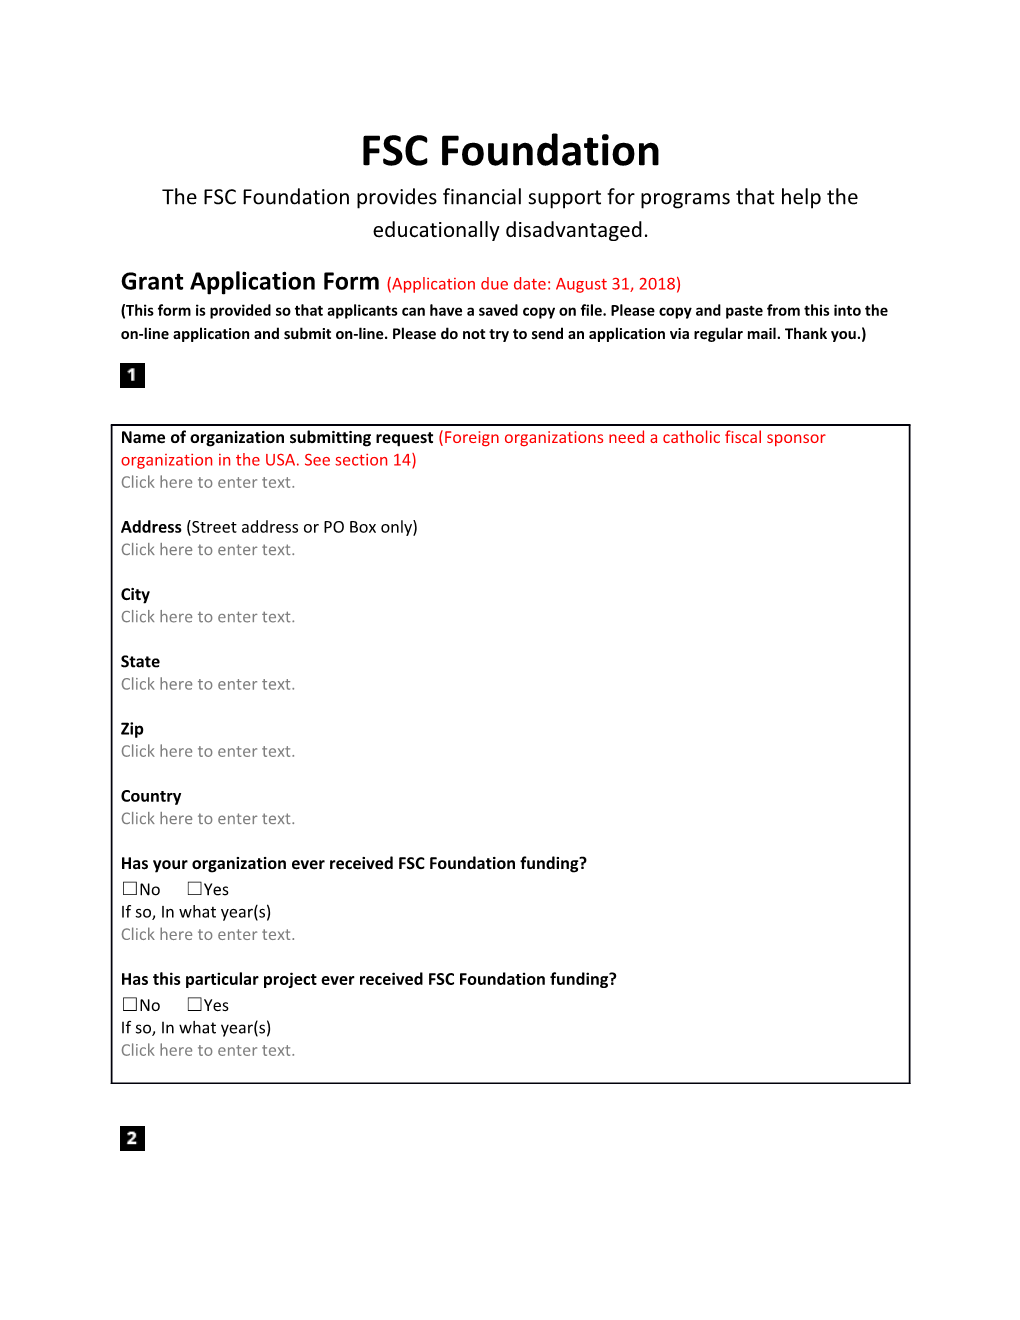 FSC Foundation the FSC Foundation Provides Financial Support for Programs That Help The